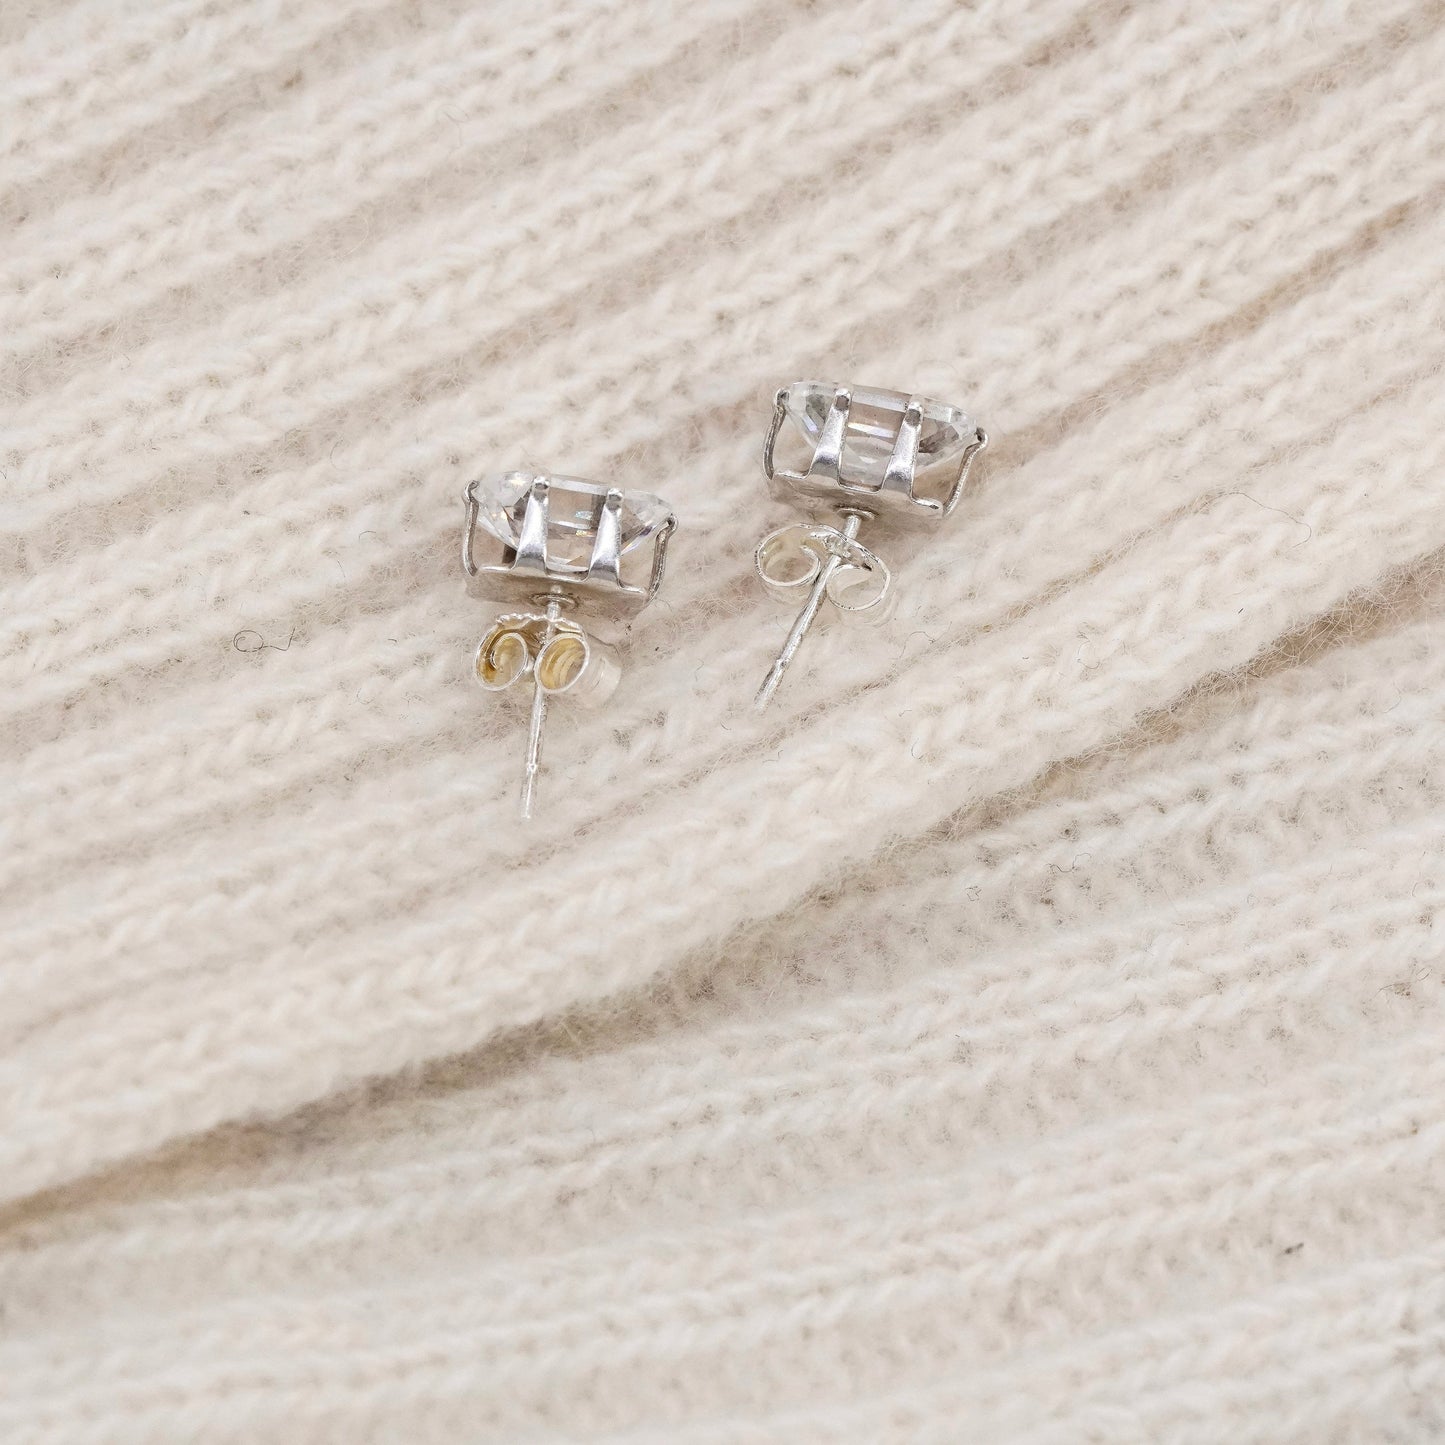 Vintage sterling silver square clear CZ studs, fashion minimalist earrings